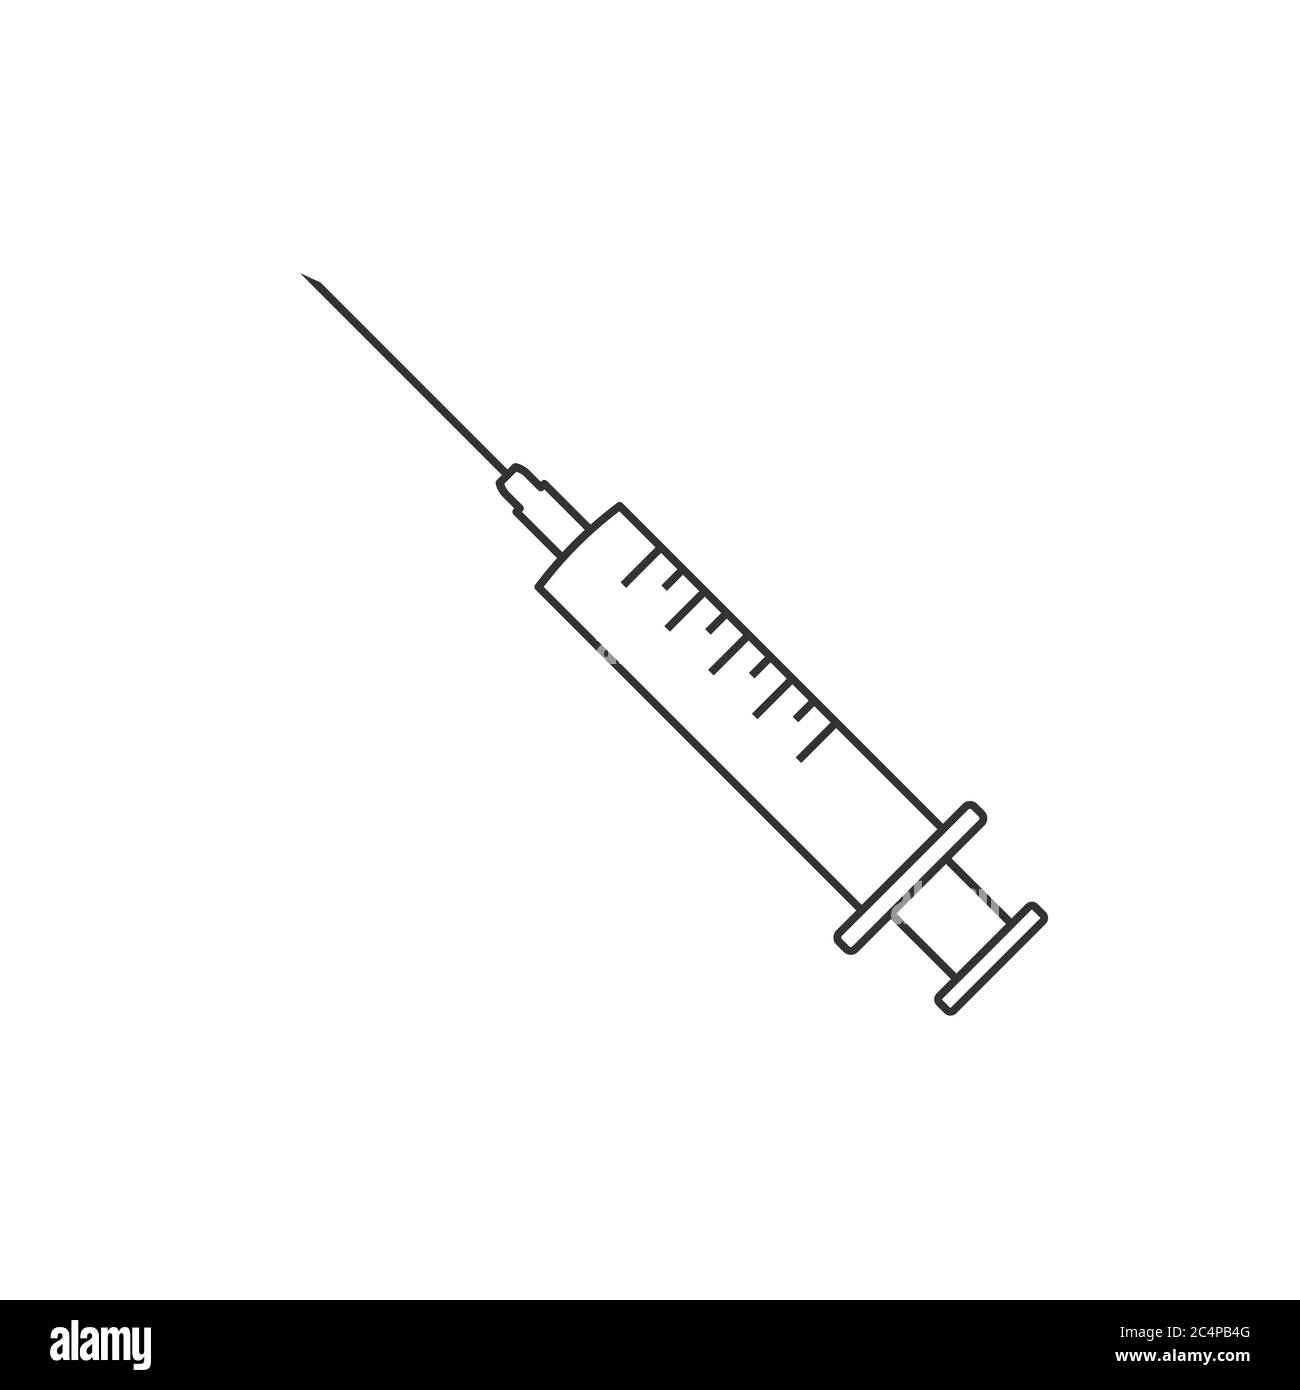 Syringe with needle line icon. Medical treatment concept. Intramuscular, hypodermic or intravenous injection. Vaccination concept. Black outline Stock Vector